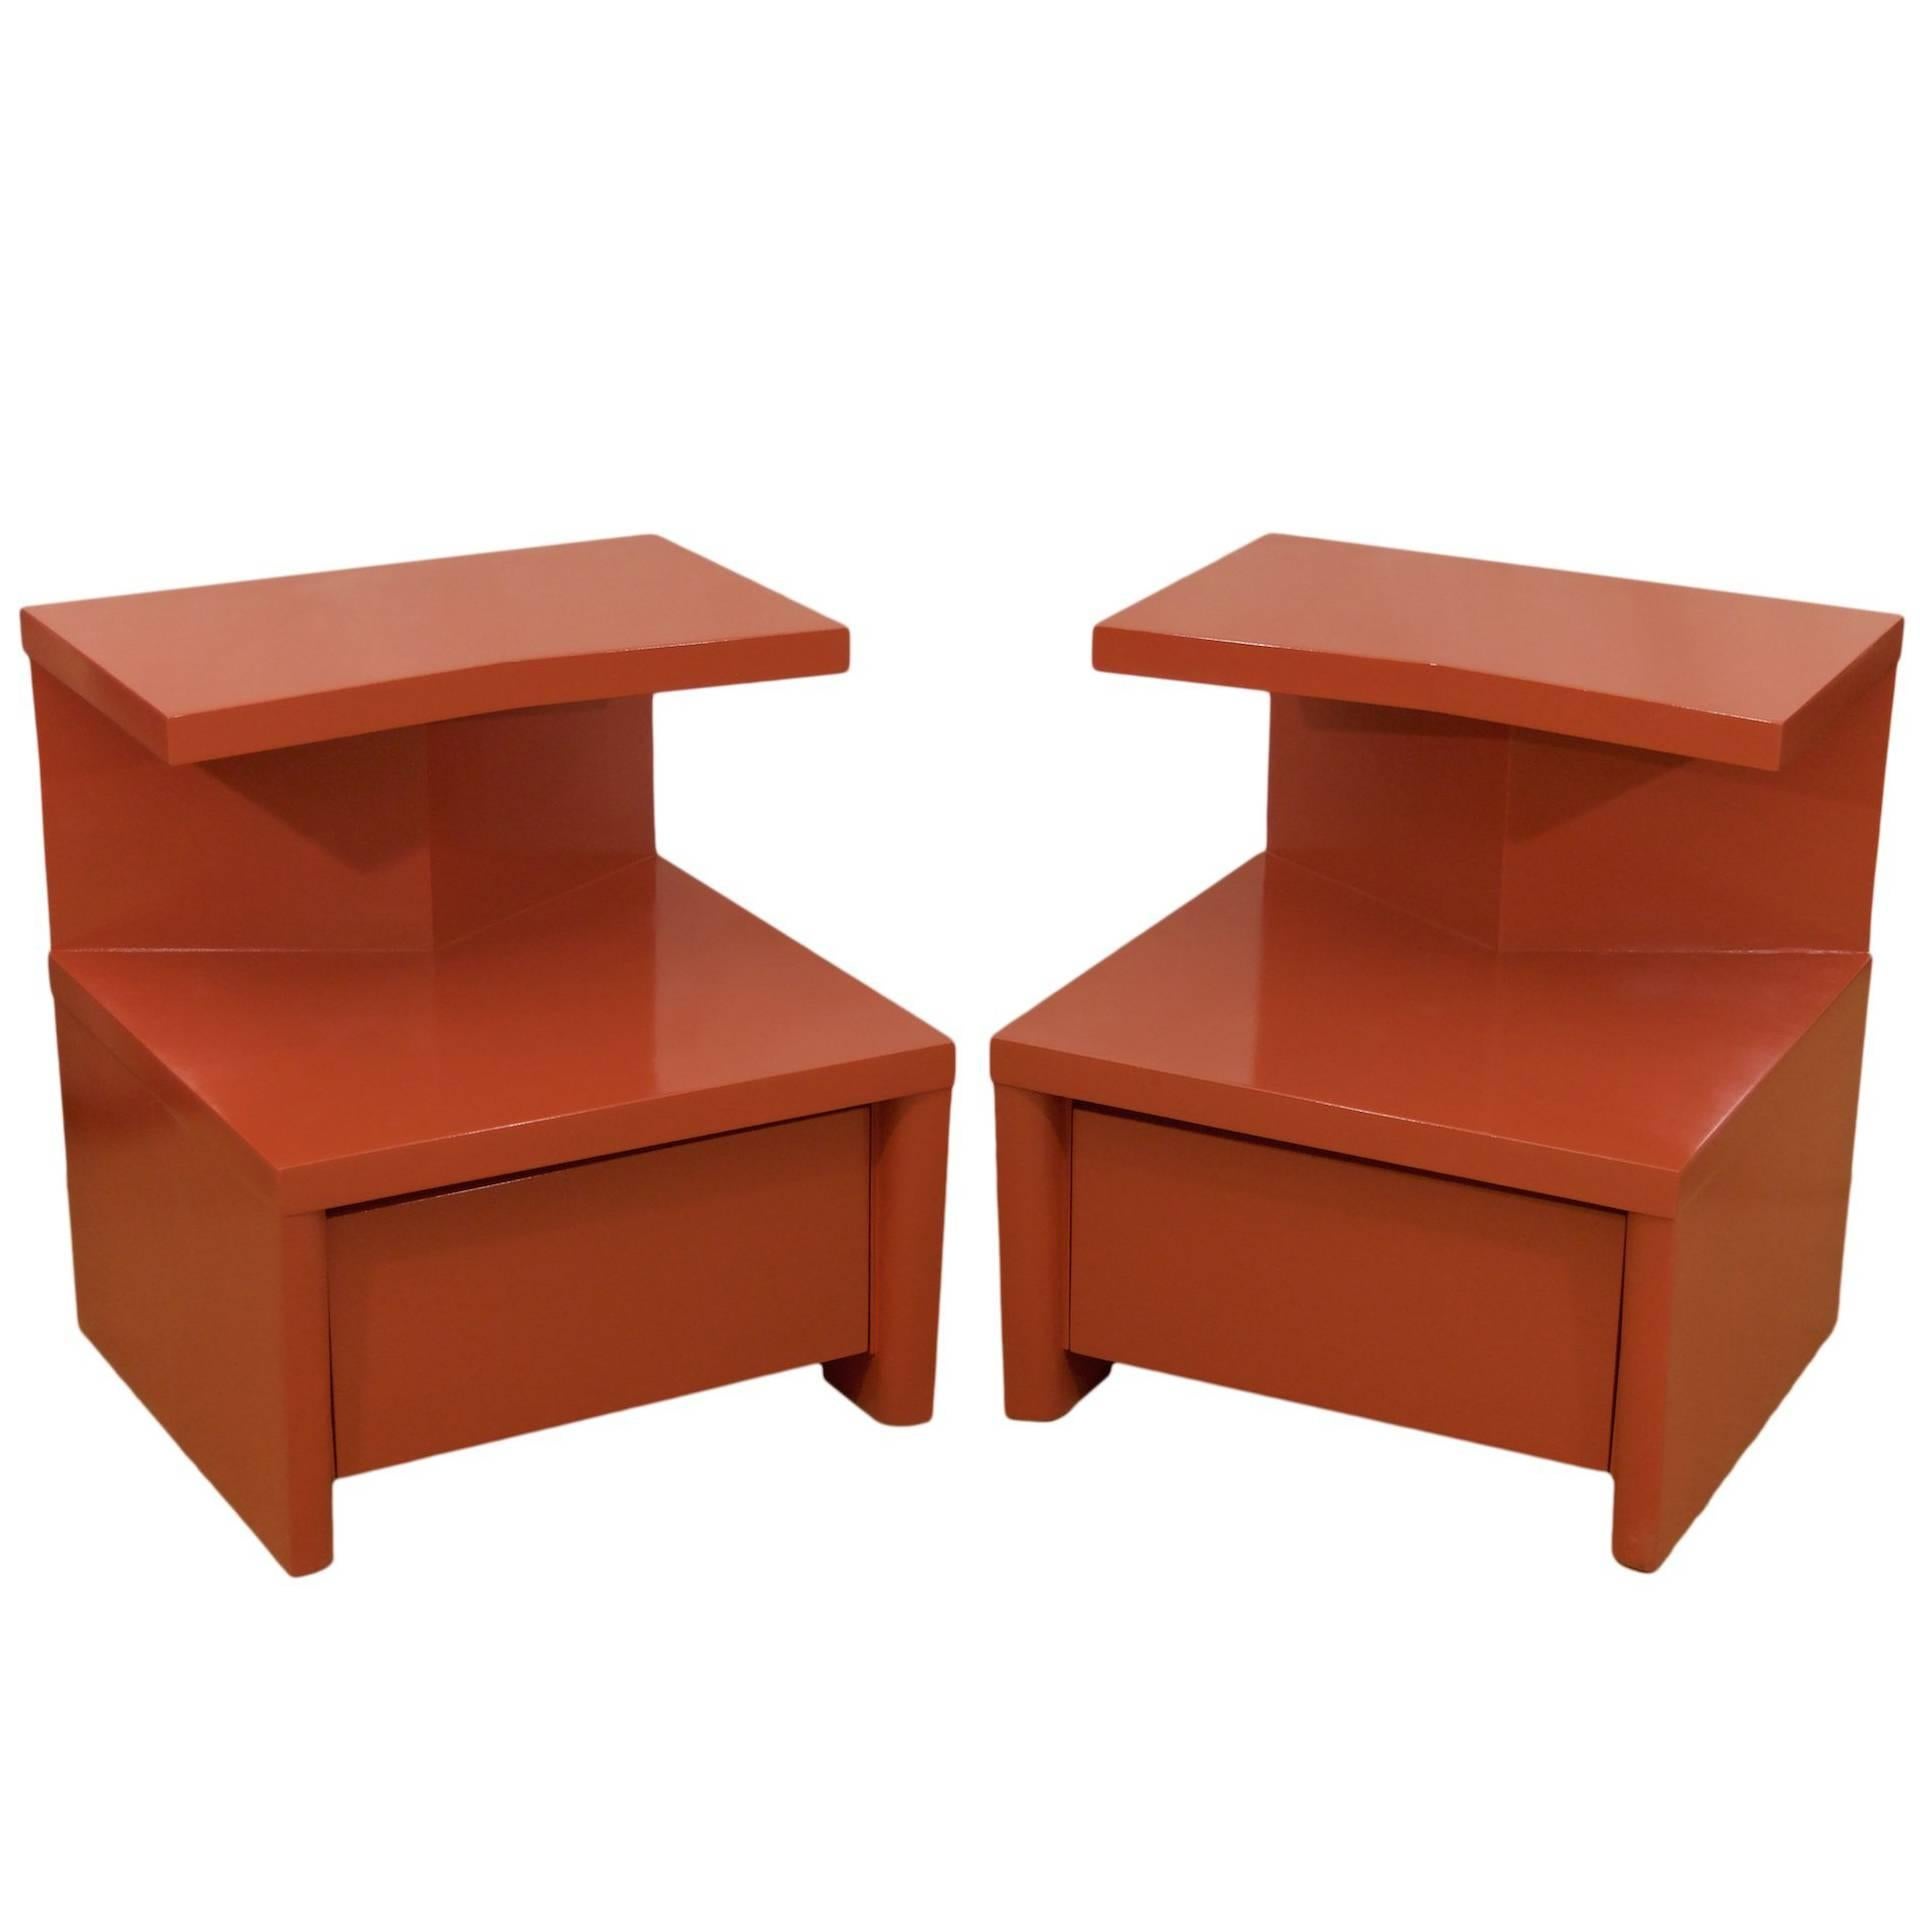 Pair of Cantilevered Red Lacquer Nightstands